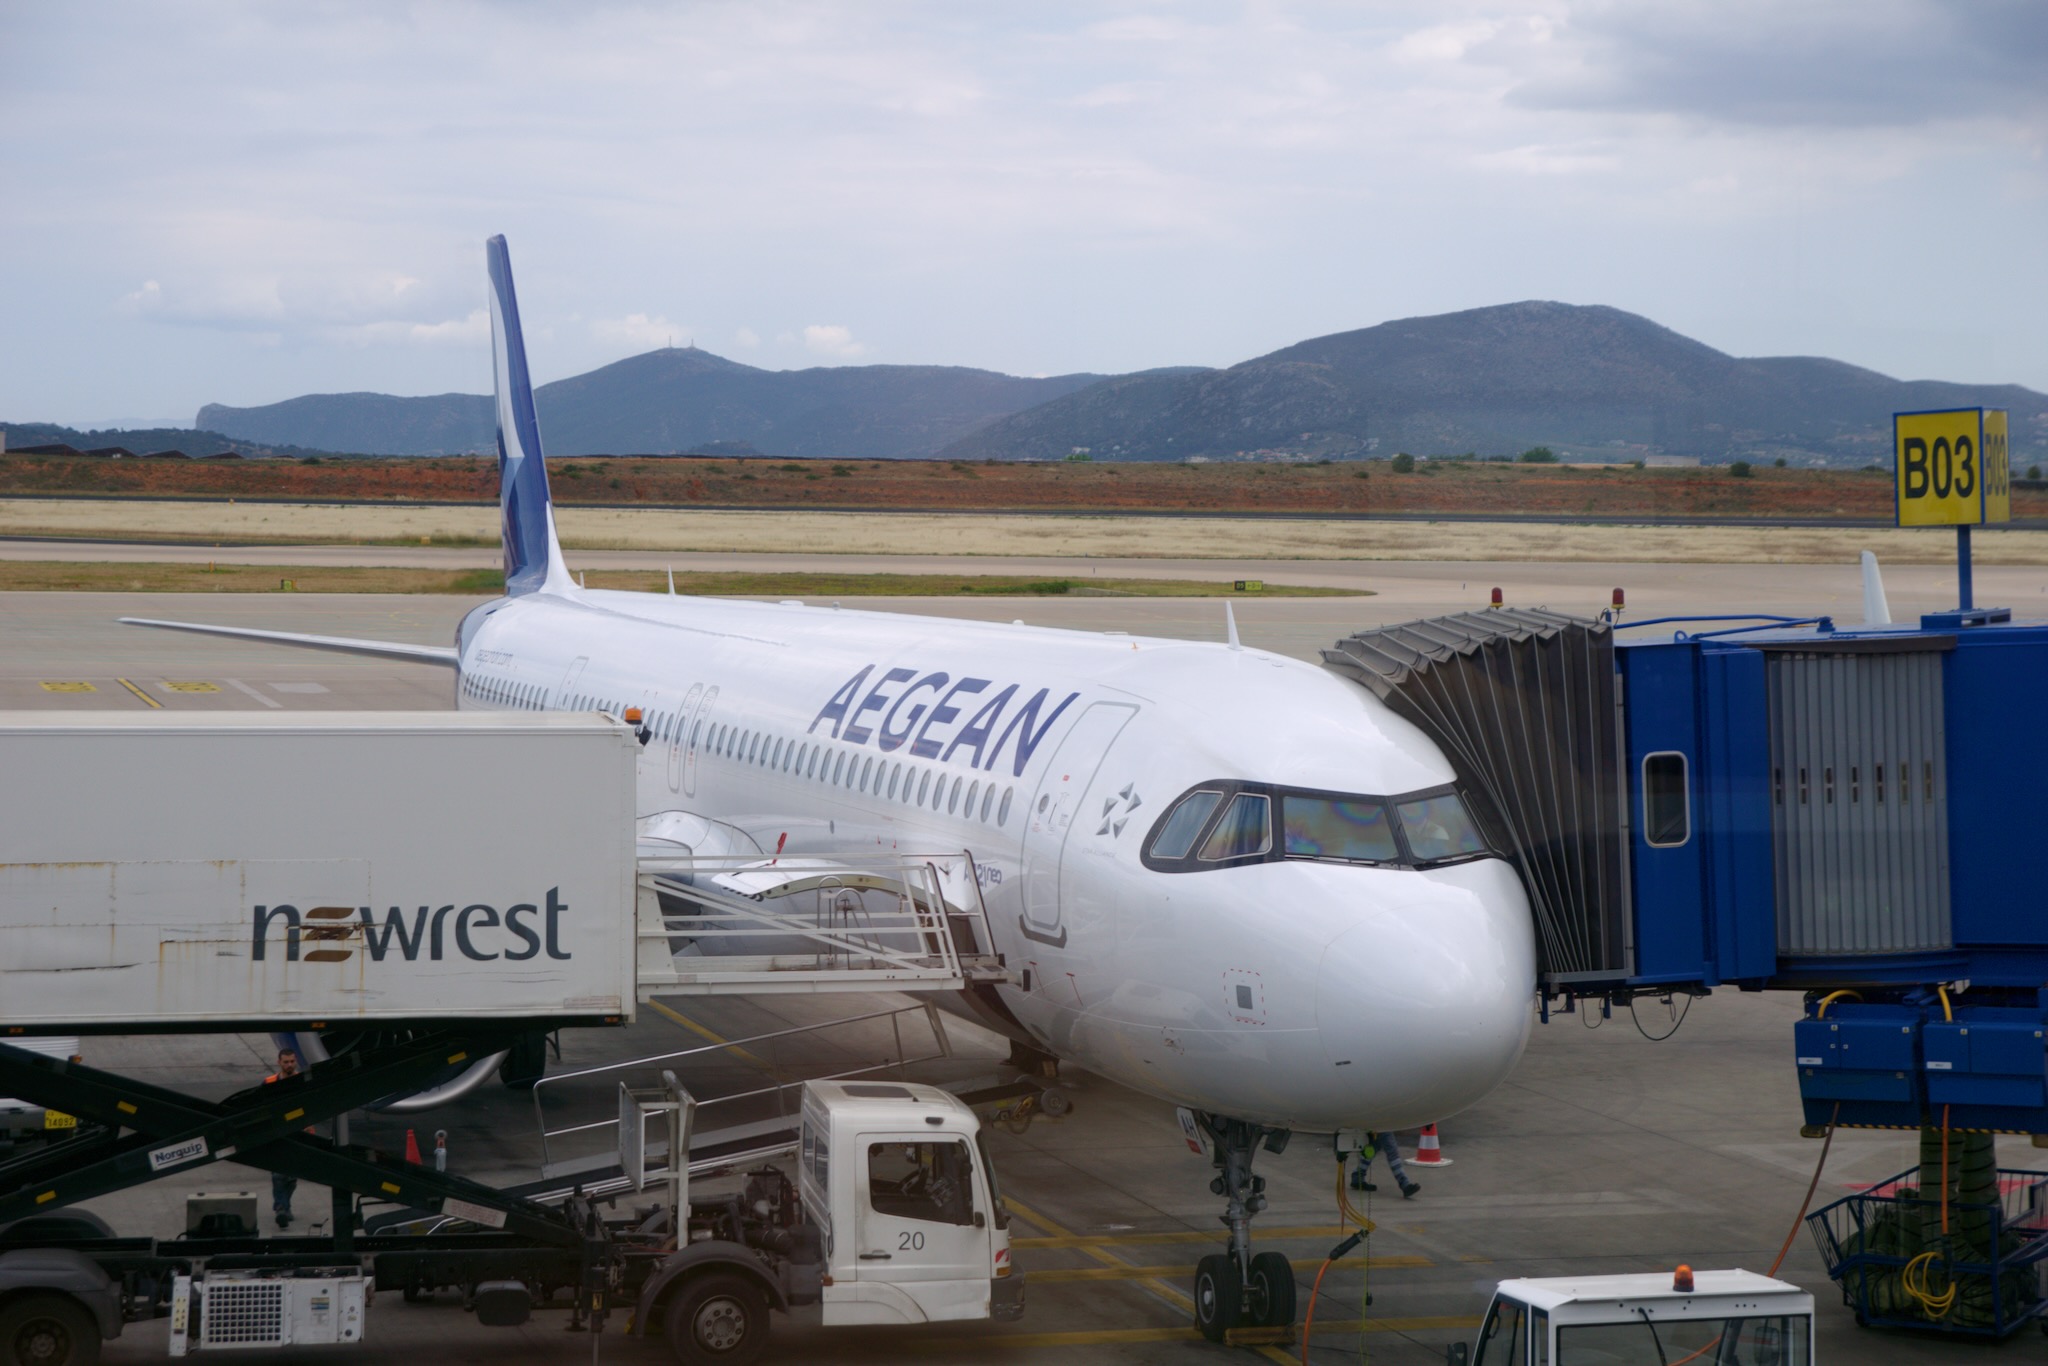 Aegean Airlines Airbus A321neo